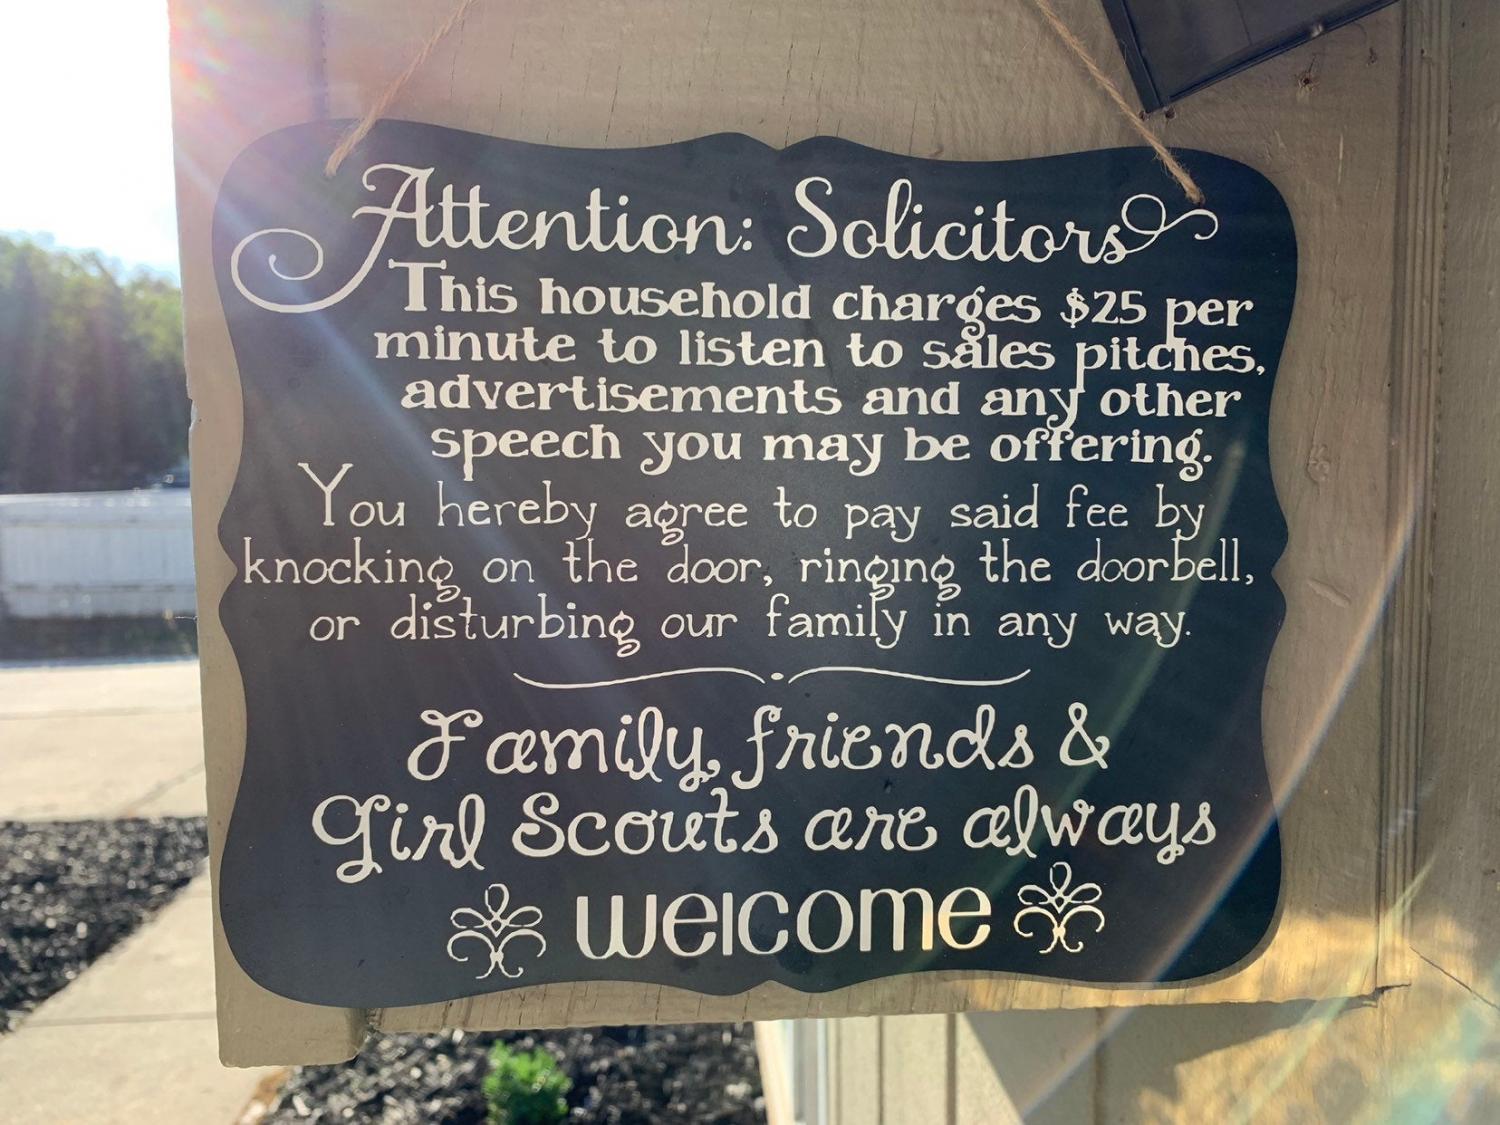 Welcome Solicitors - Best Funny No Soliciting Signs